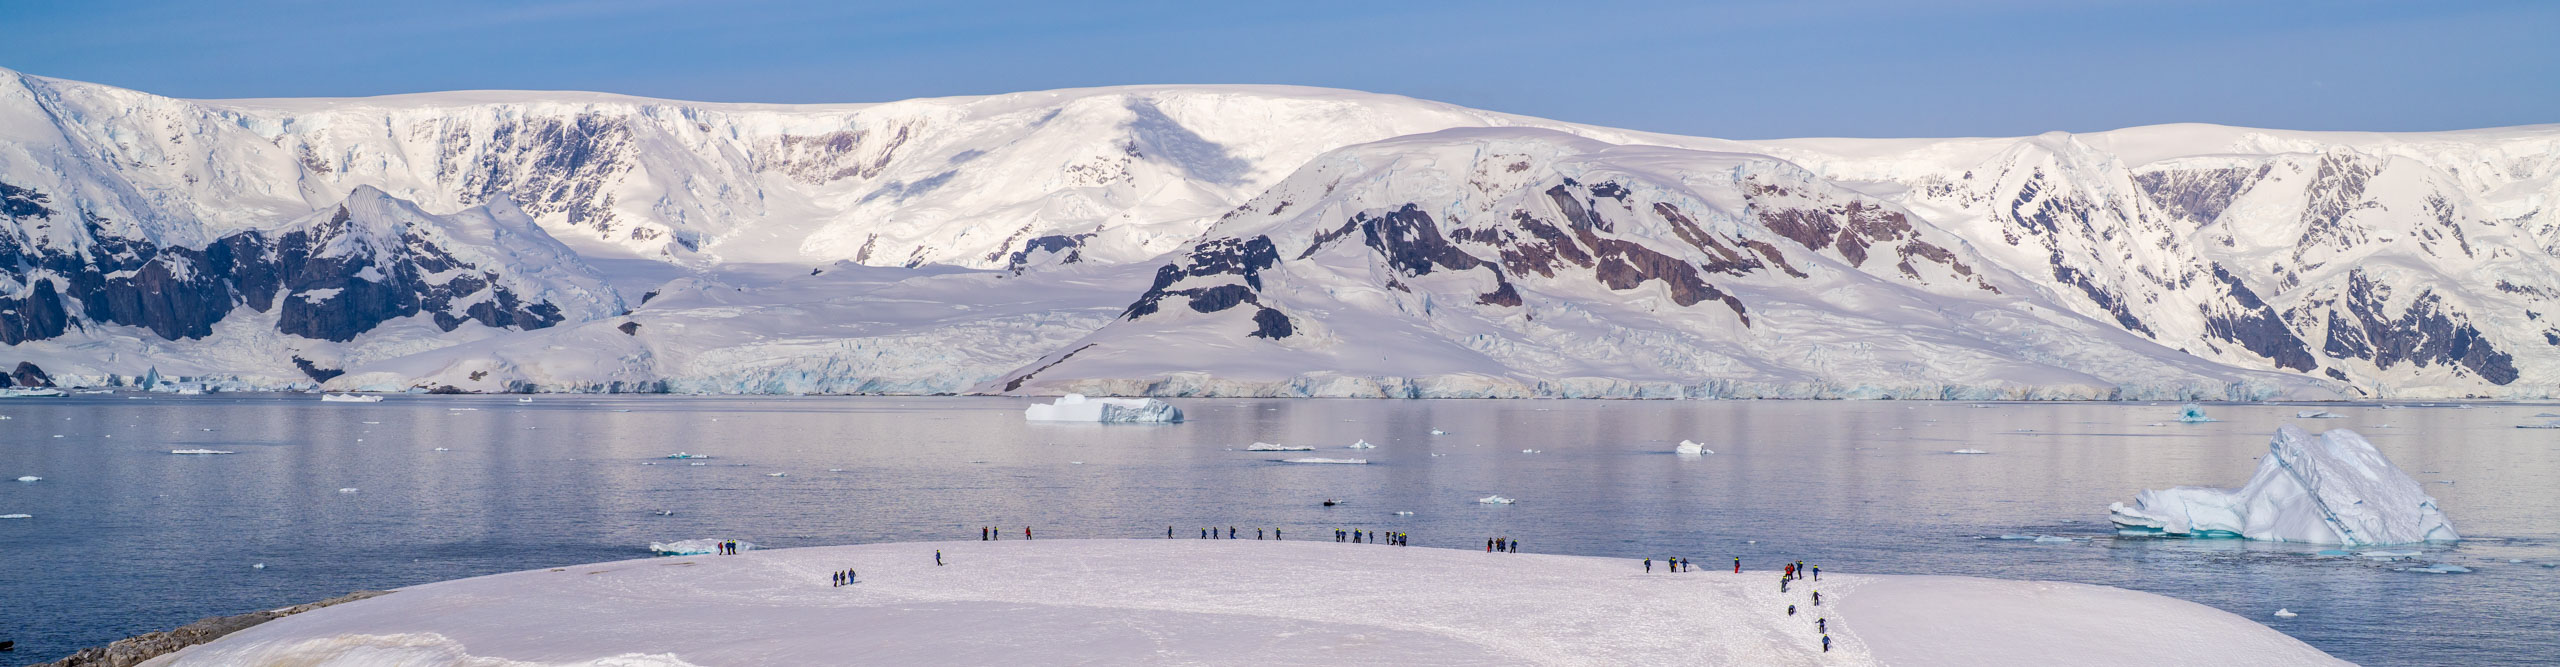 View of the water, hills, snow and ice with people on the shoreline in Antarctica 